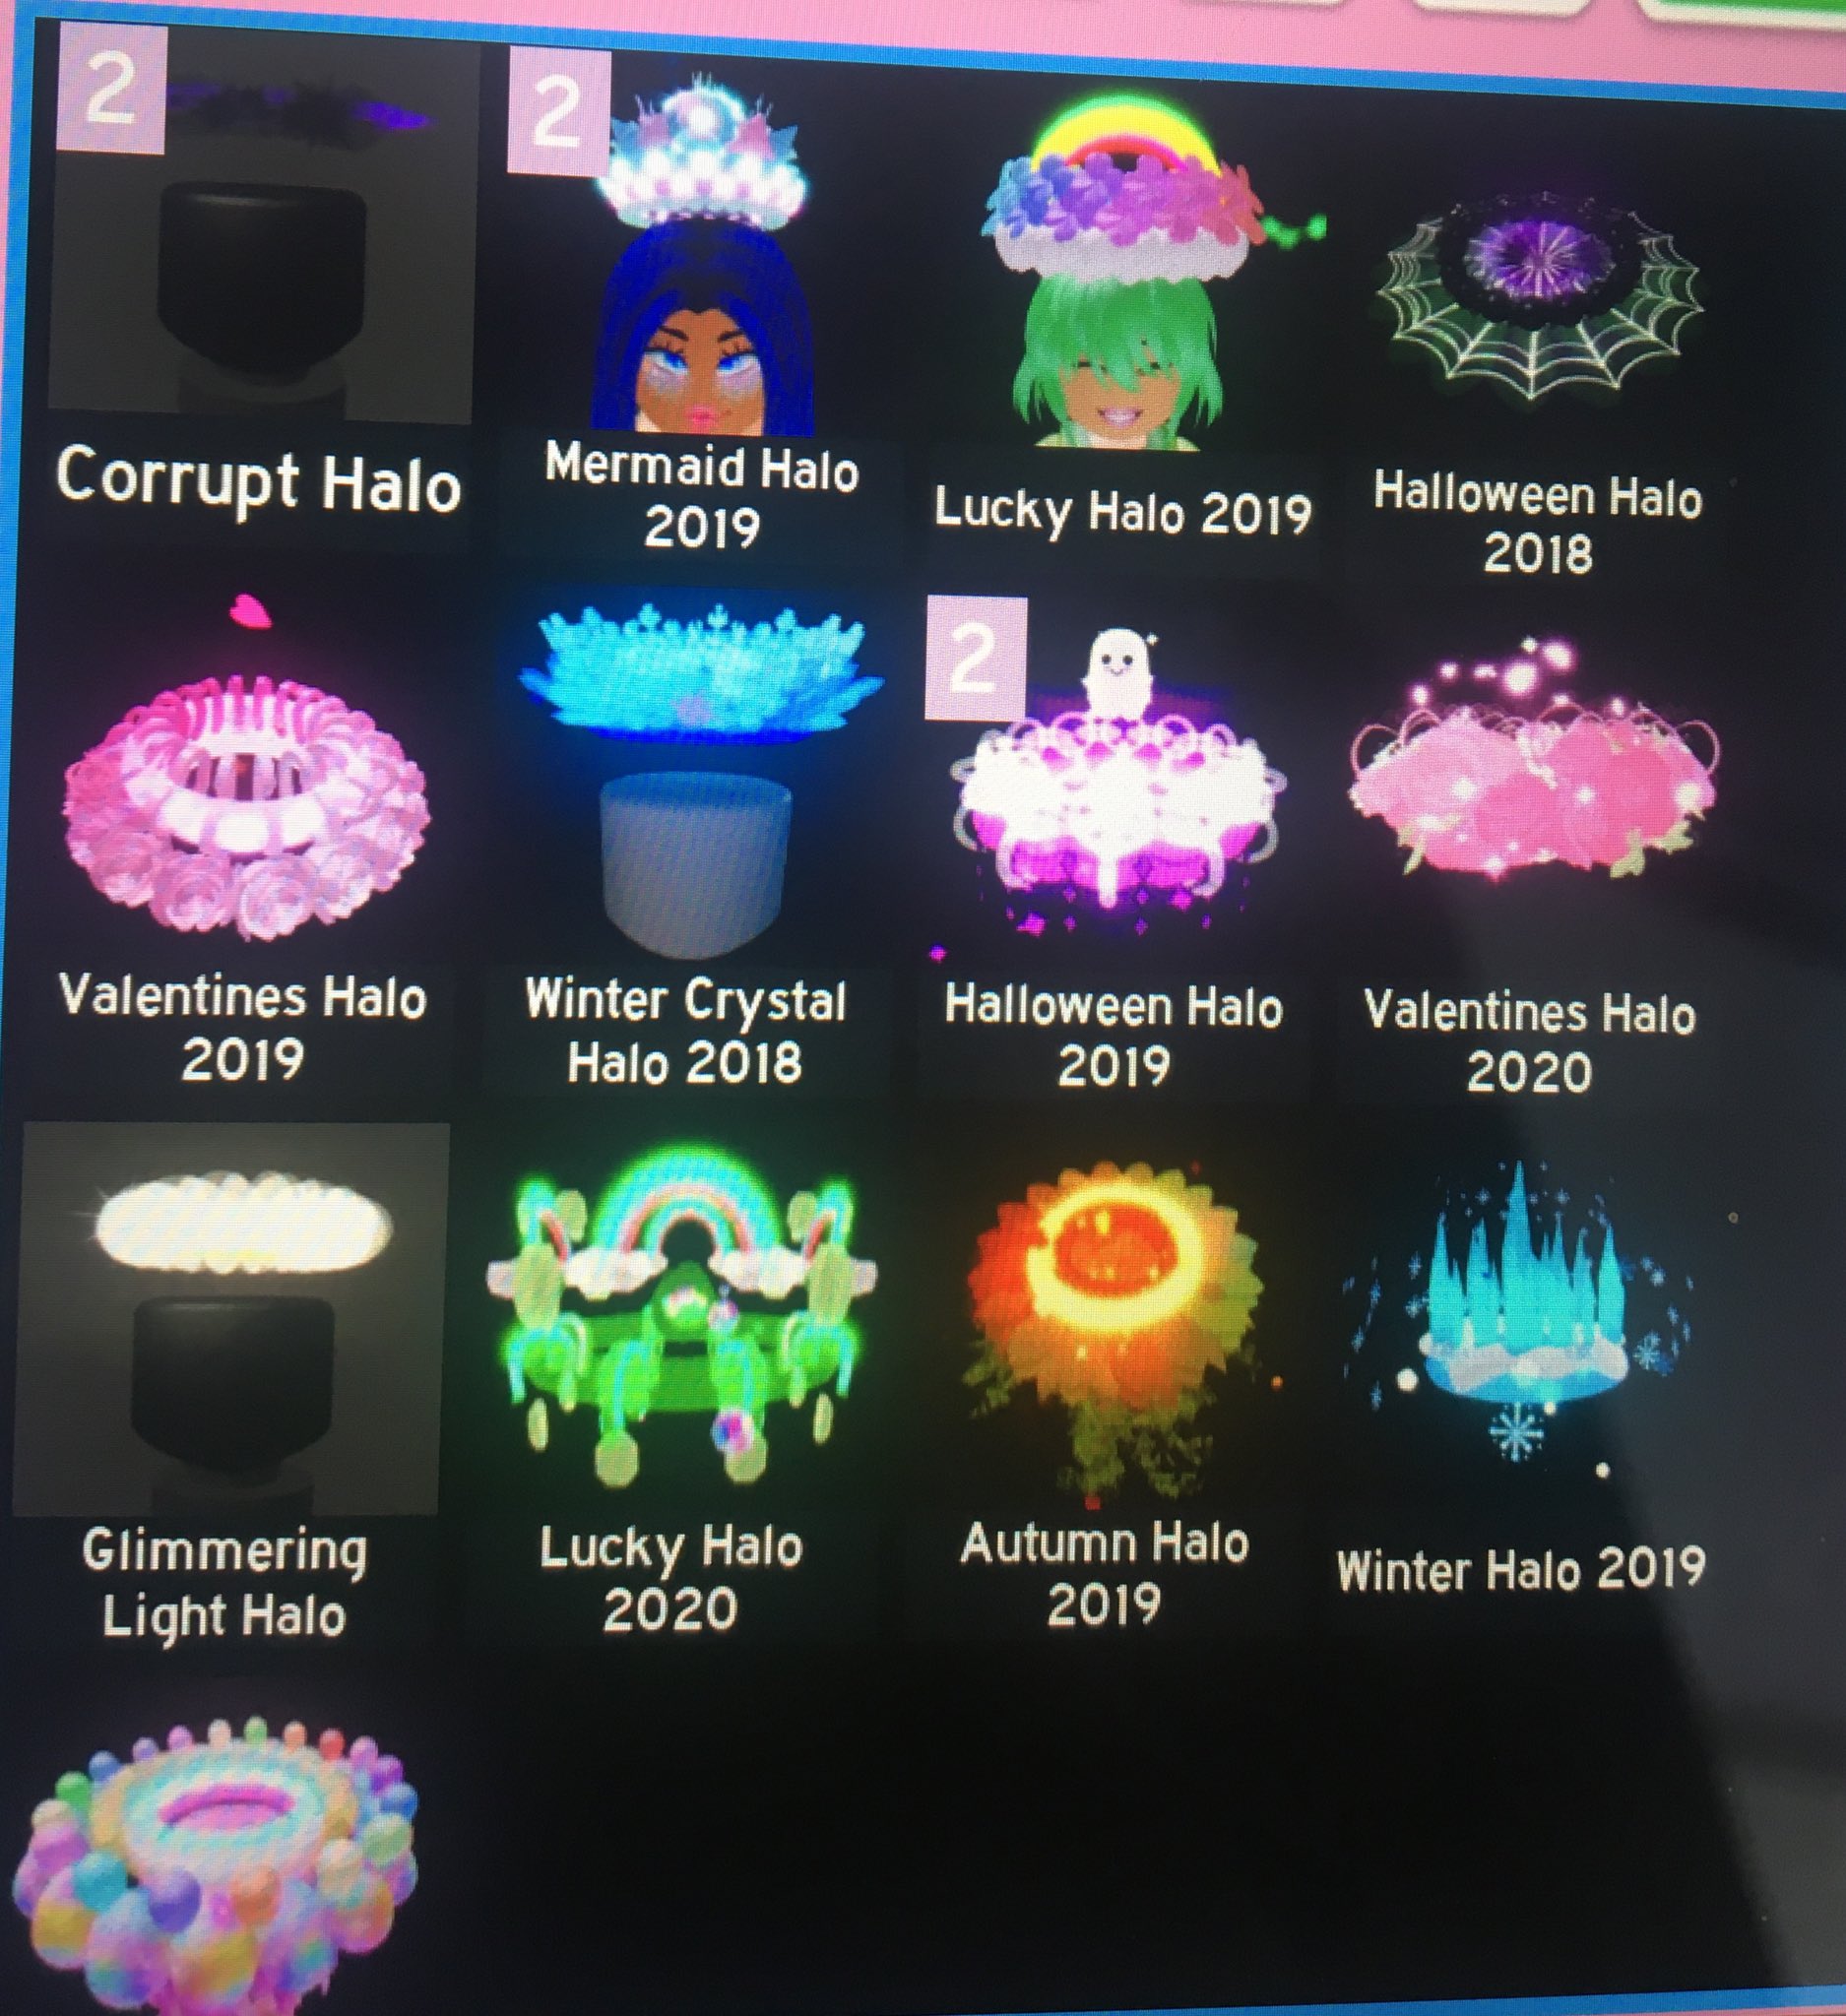 Ceo Of Saying No On Twitter Inventory Update Royalehightrades Royalehightrading Looking To Trade Corrupt Mermaid Some Adds For Vday 2020 Https T Co Z1wmffgt38 - roblox on twitter at heavenlogin thanks for adding the p41nt